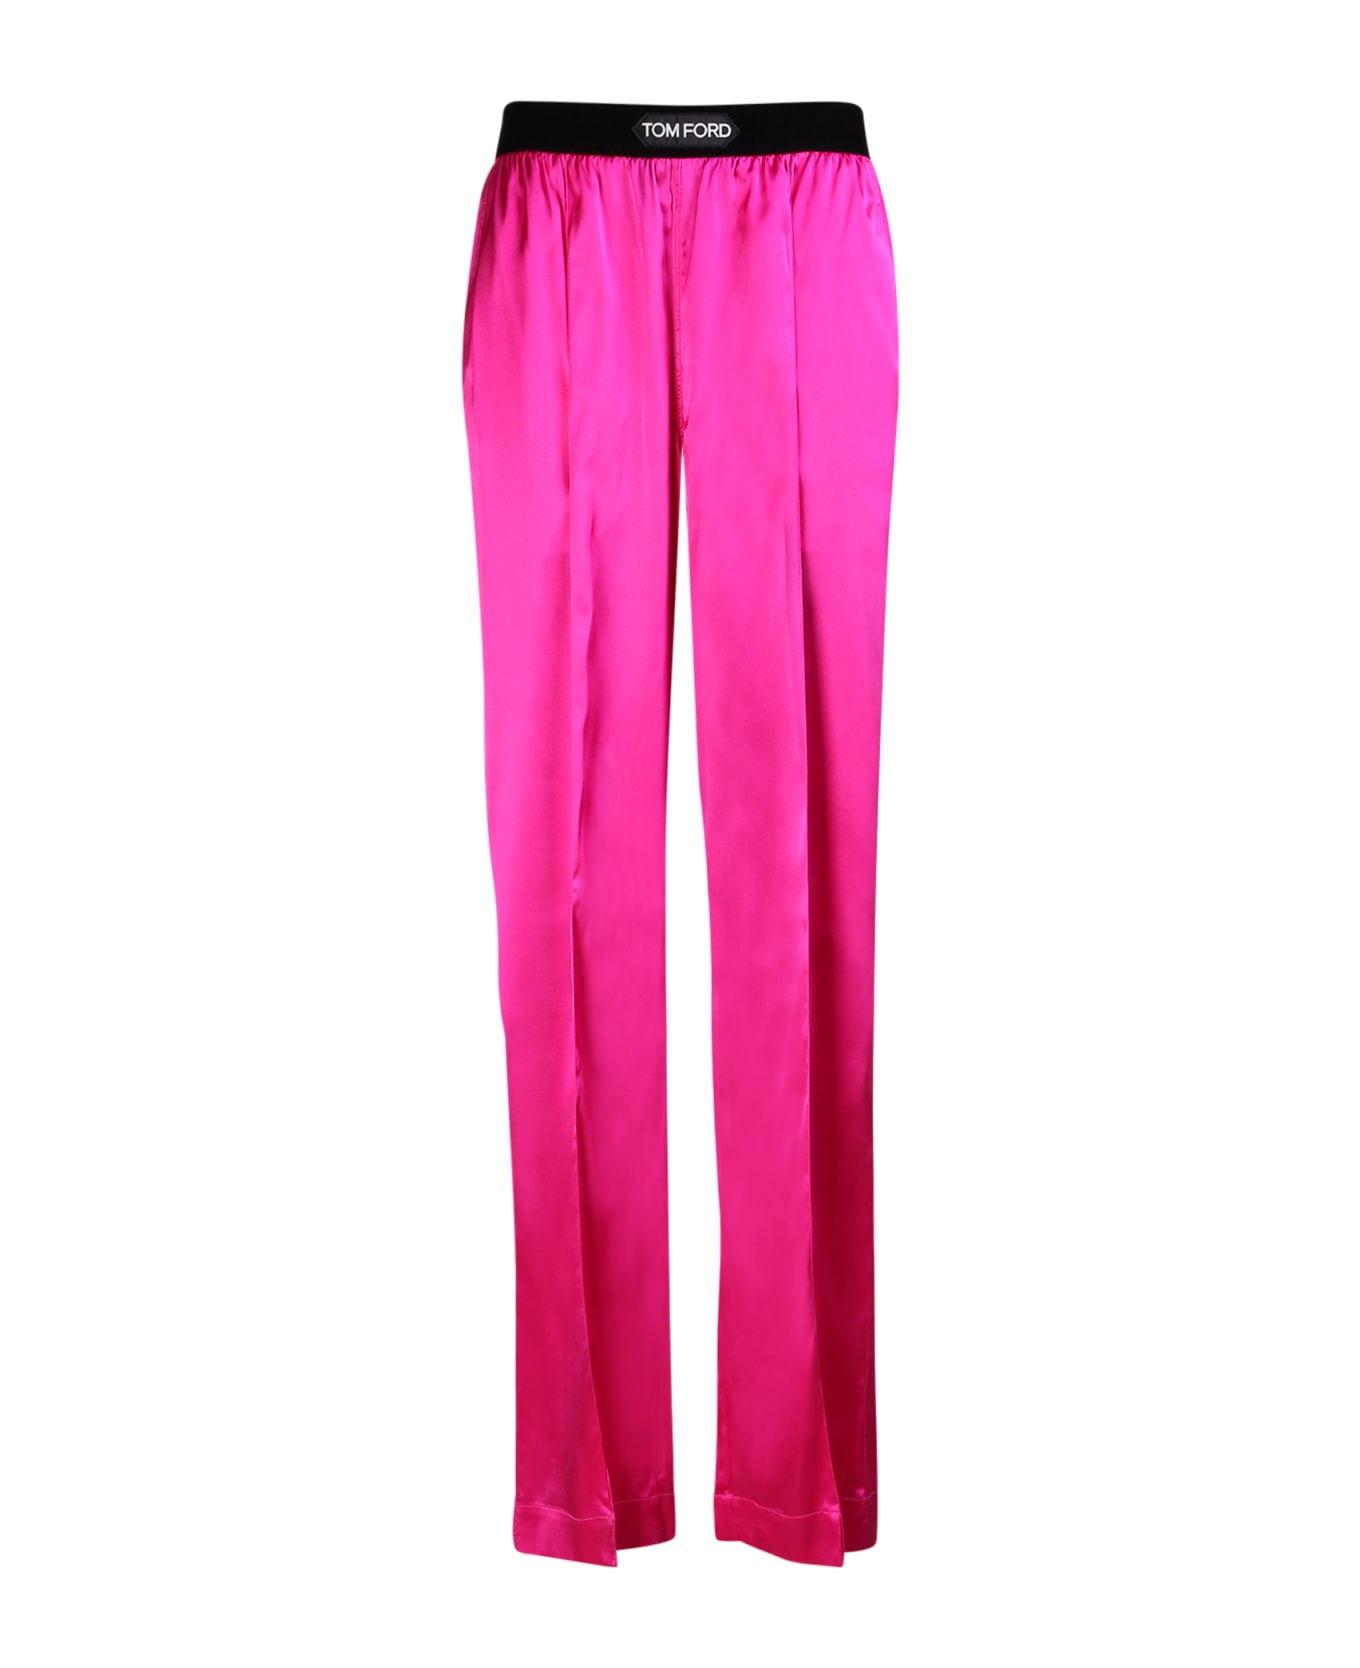 Tom Ford Silk Trousers - HOT PINK